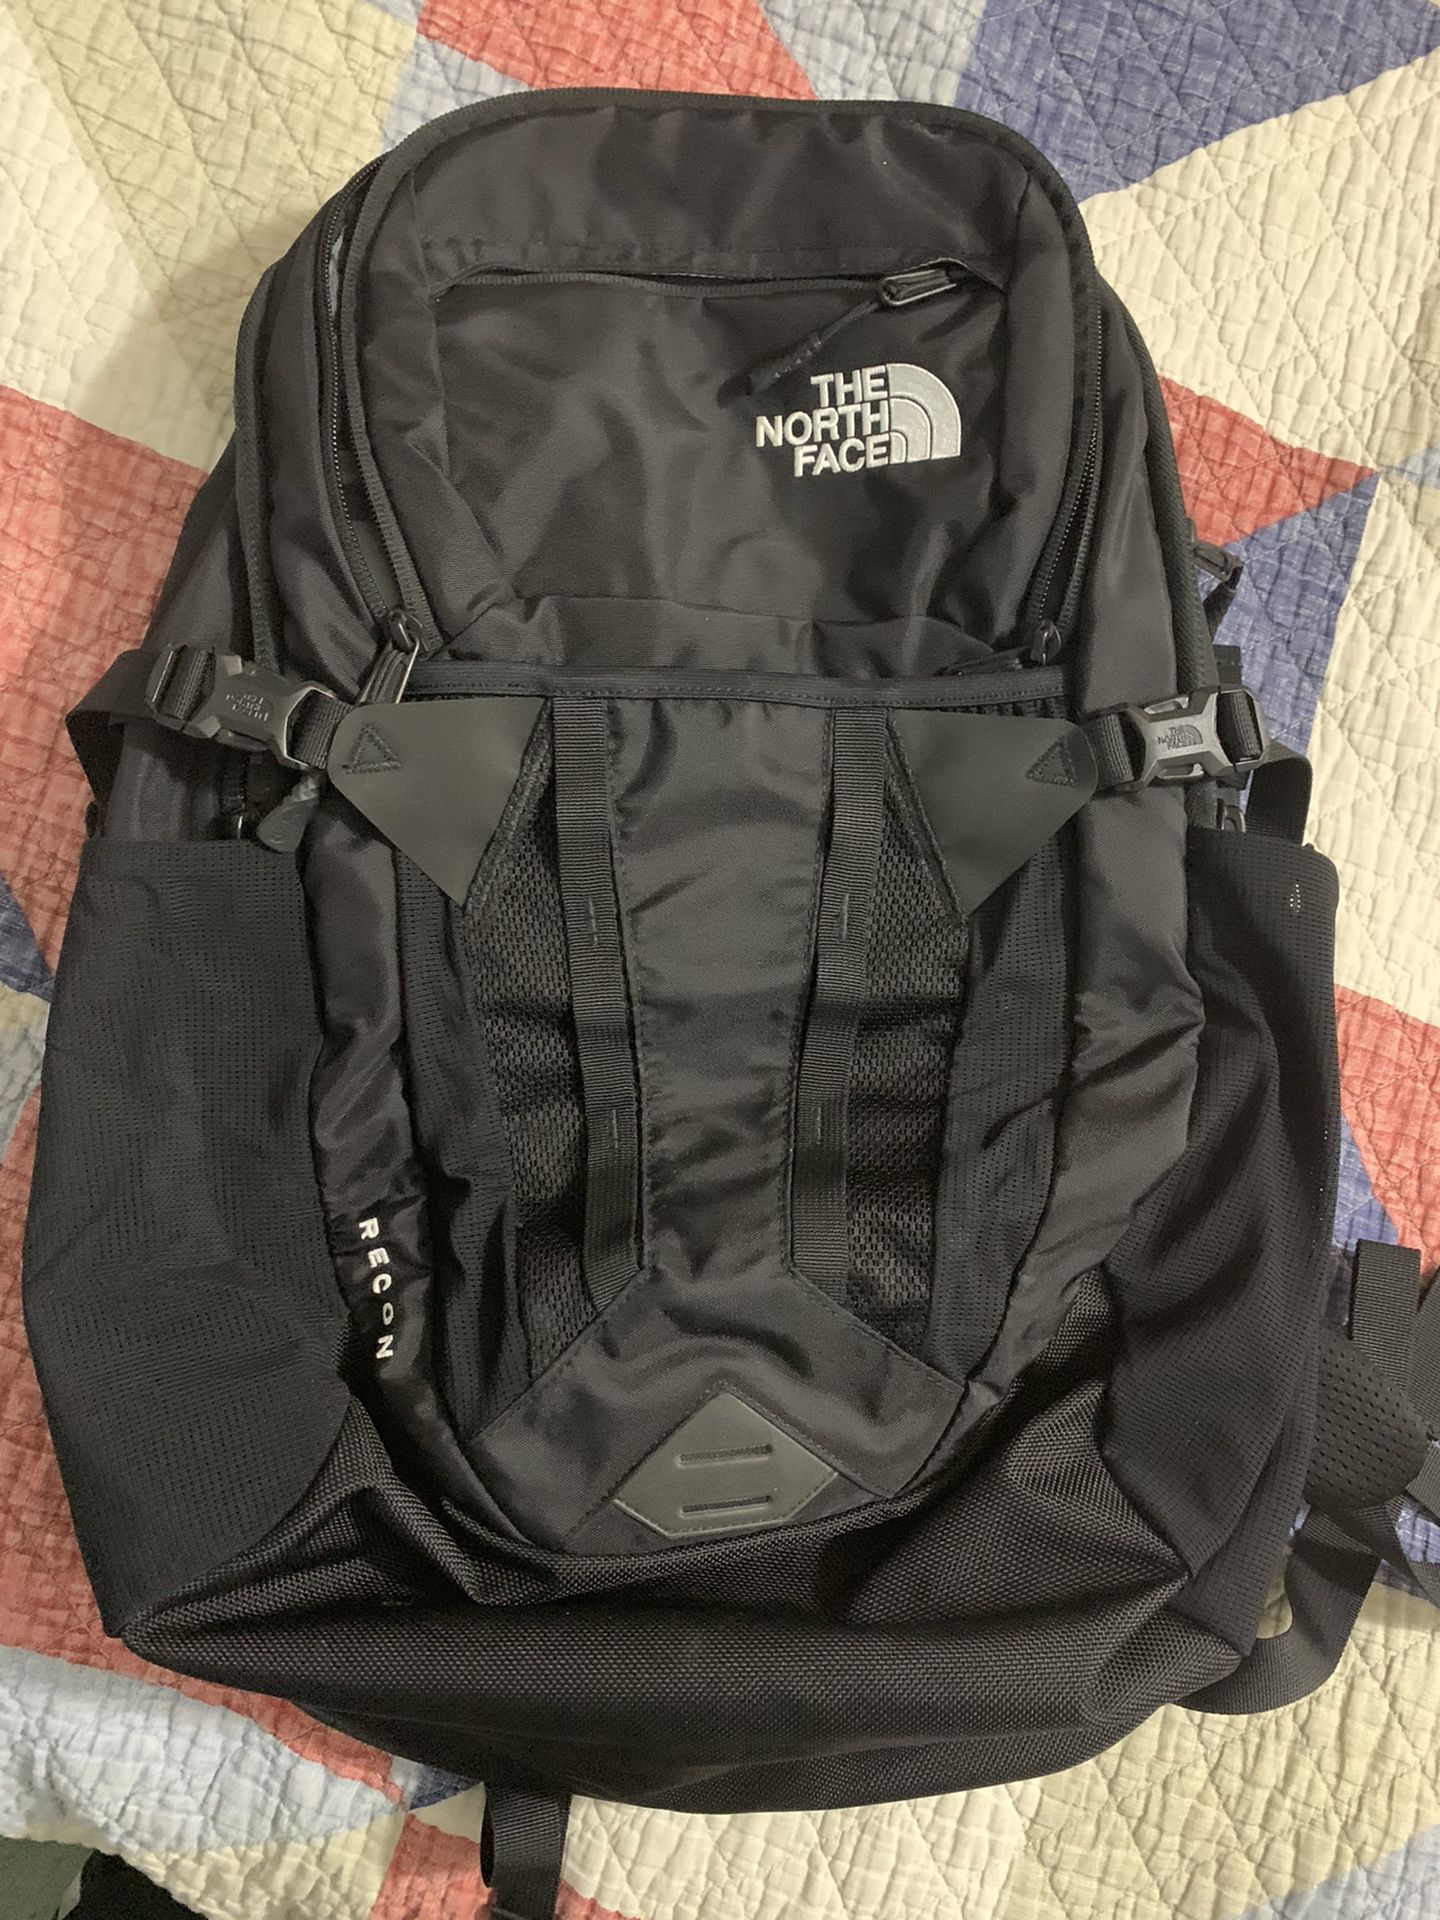 The North Face (Recon) backpack